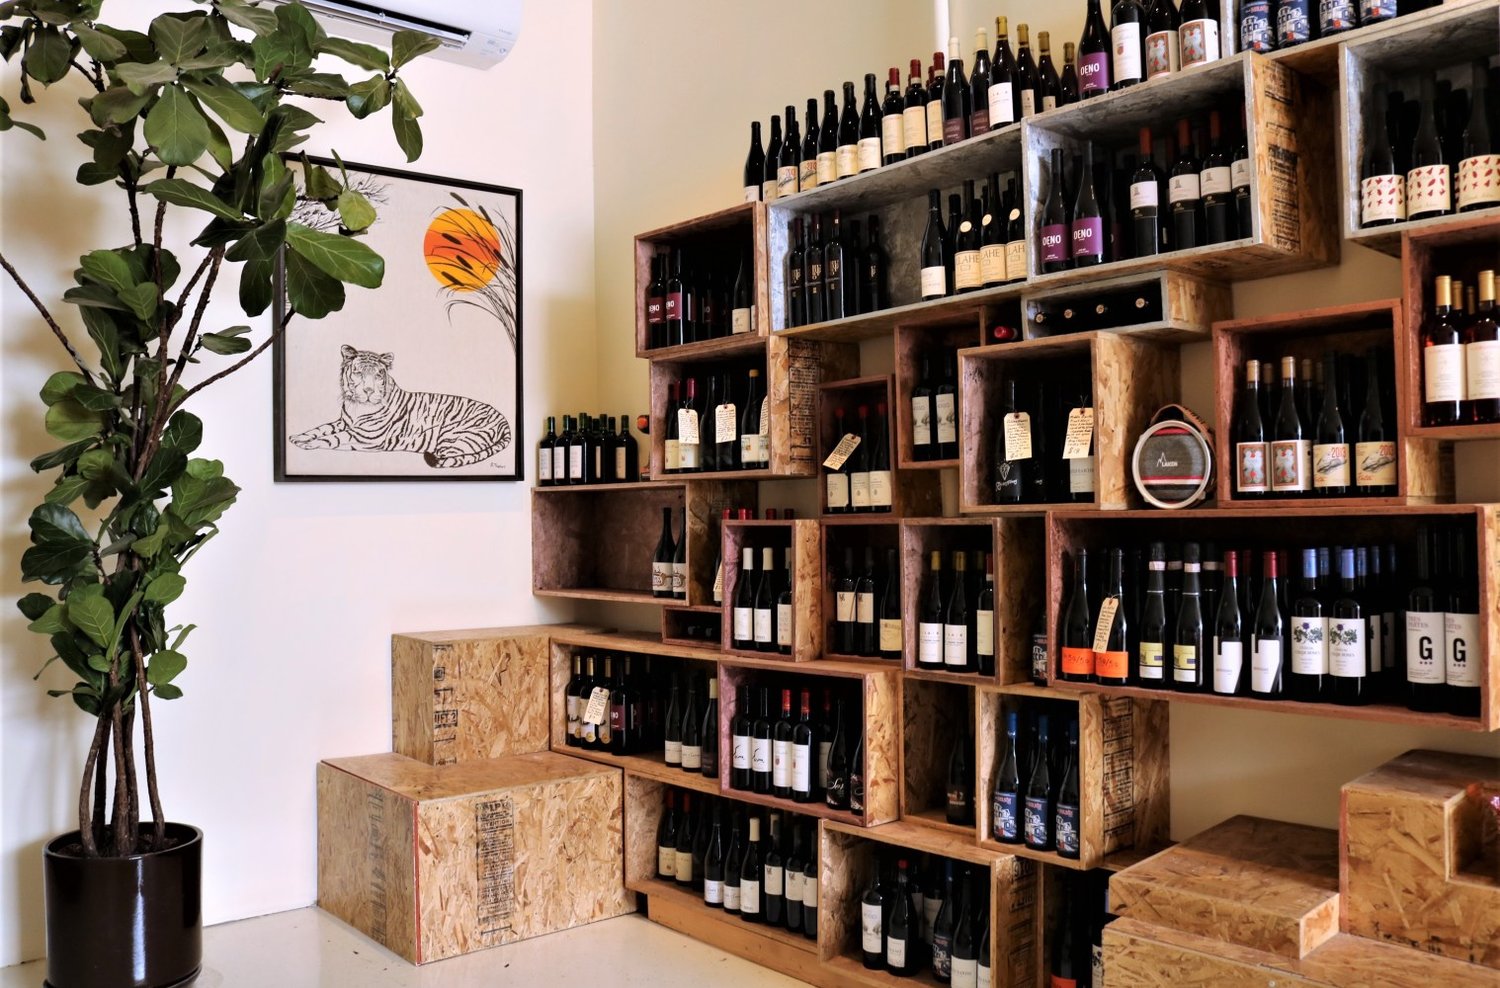 Wall of wine bottles on shelves on the right, next to a tiger painting and a potted plant